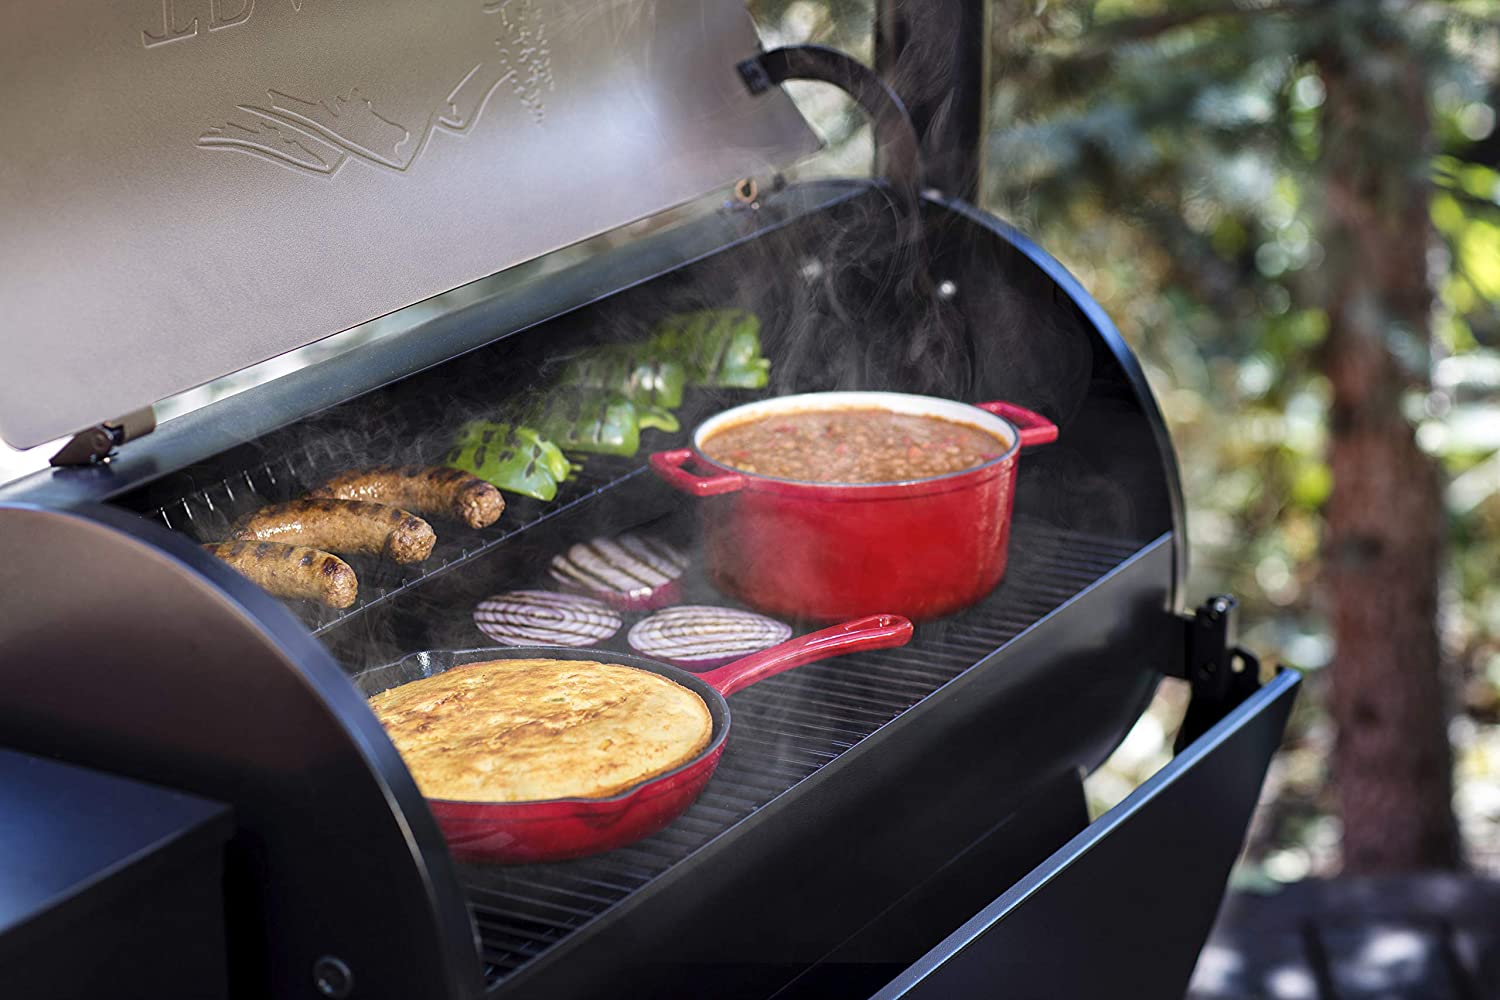 Traeger Pro Series 34 Grill